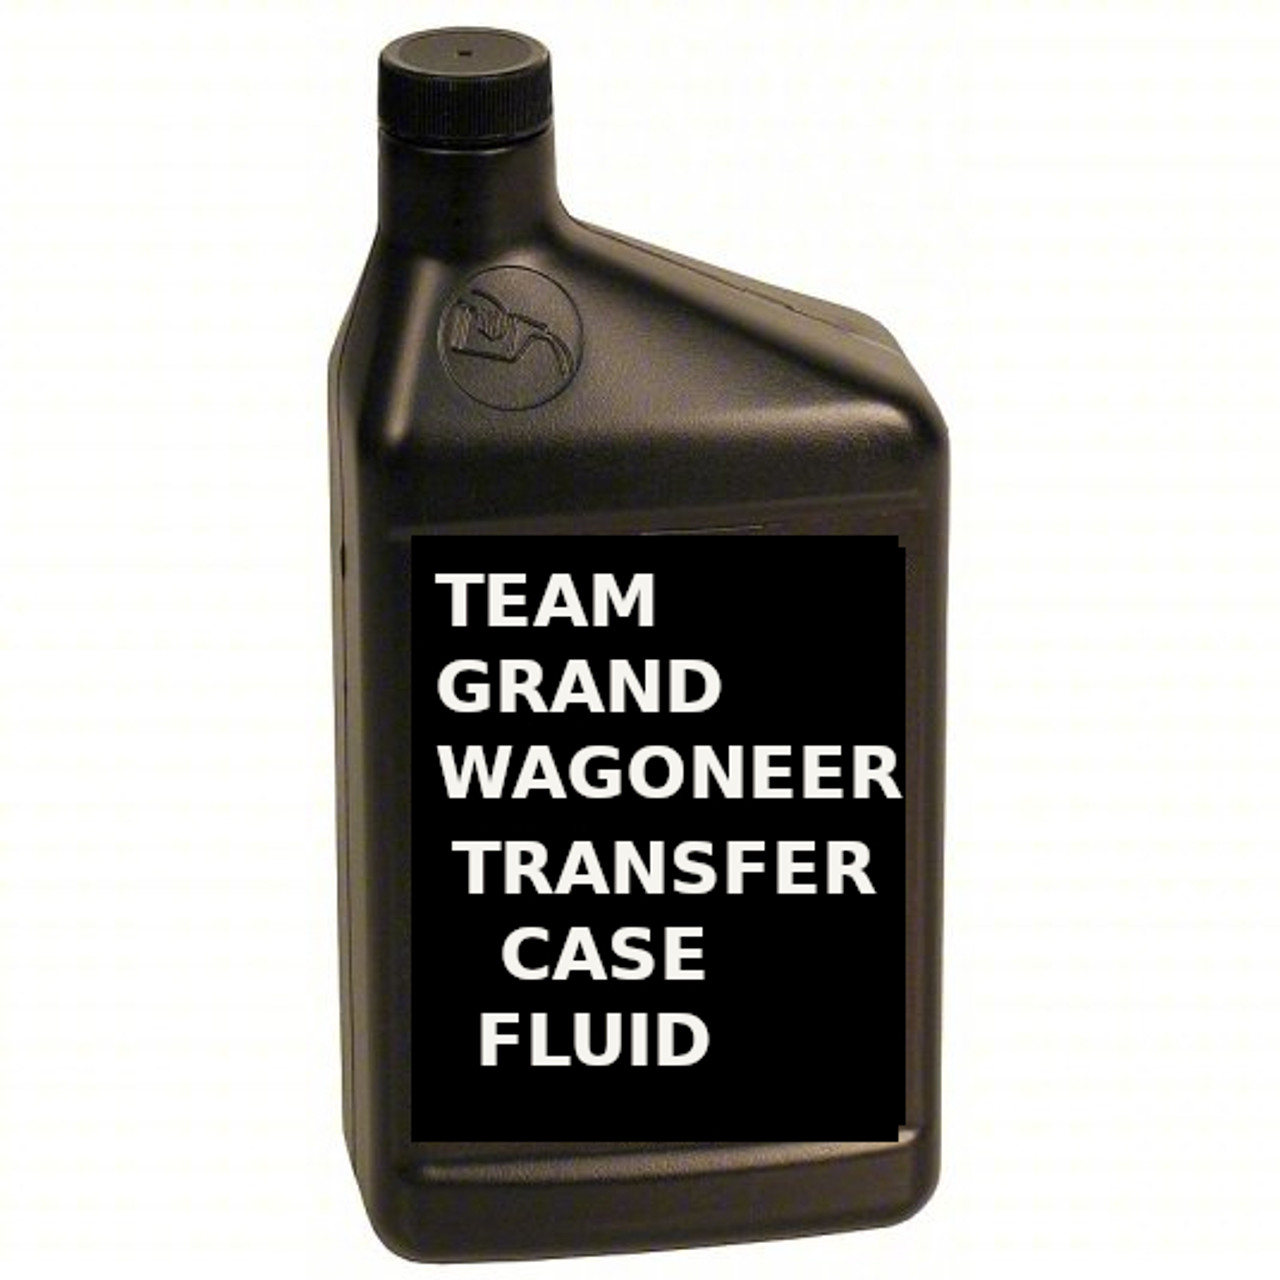 100% FULLY SYNTHETIC TRANS FLUID FOR TRANSFER CASE